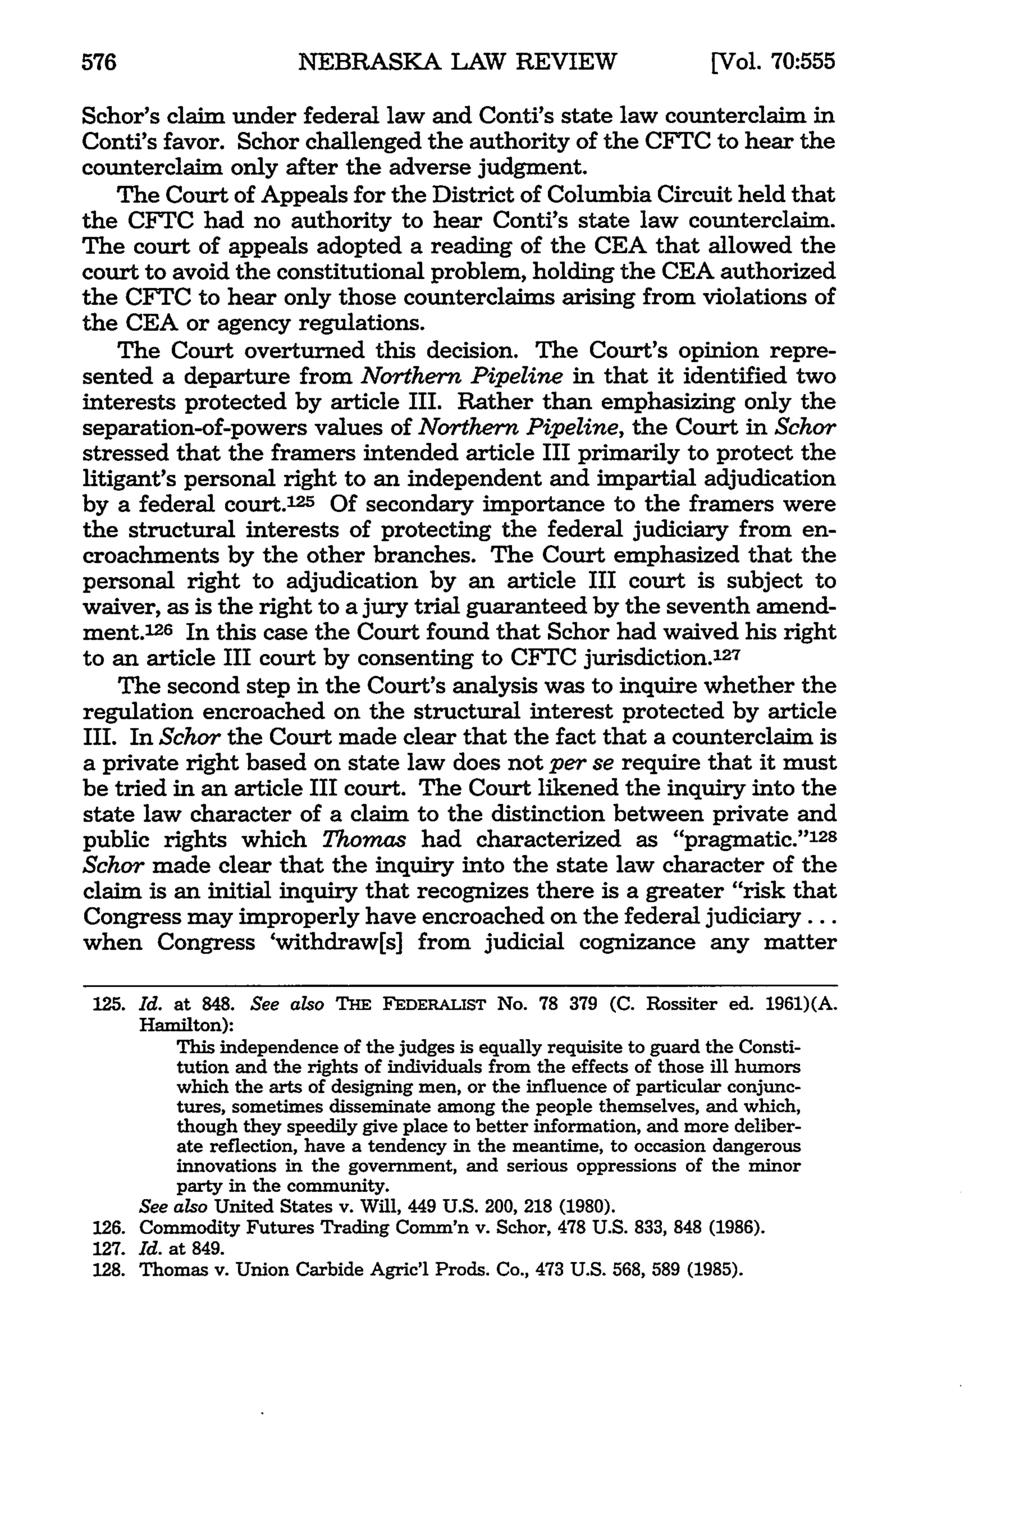 NEBRASKA LAW REVIEW [Vol. 70:555 Schor's claim under federal law and Conti's state law counterclaim in Conti's favor.